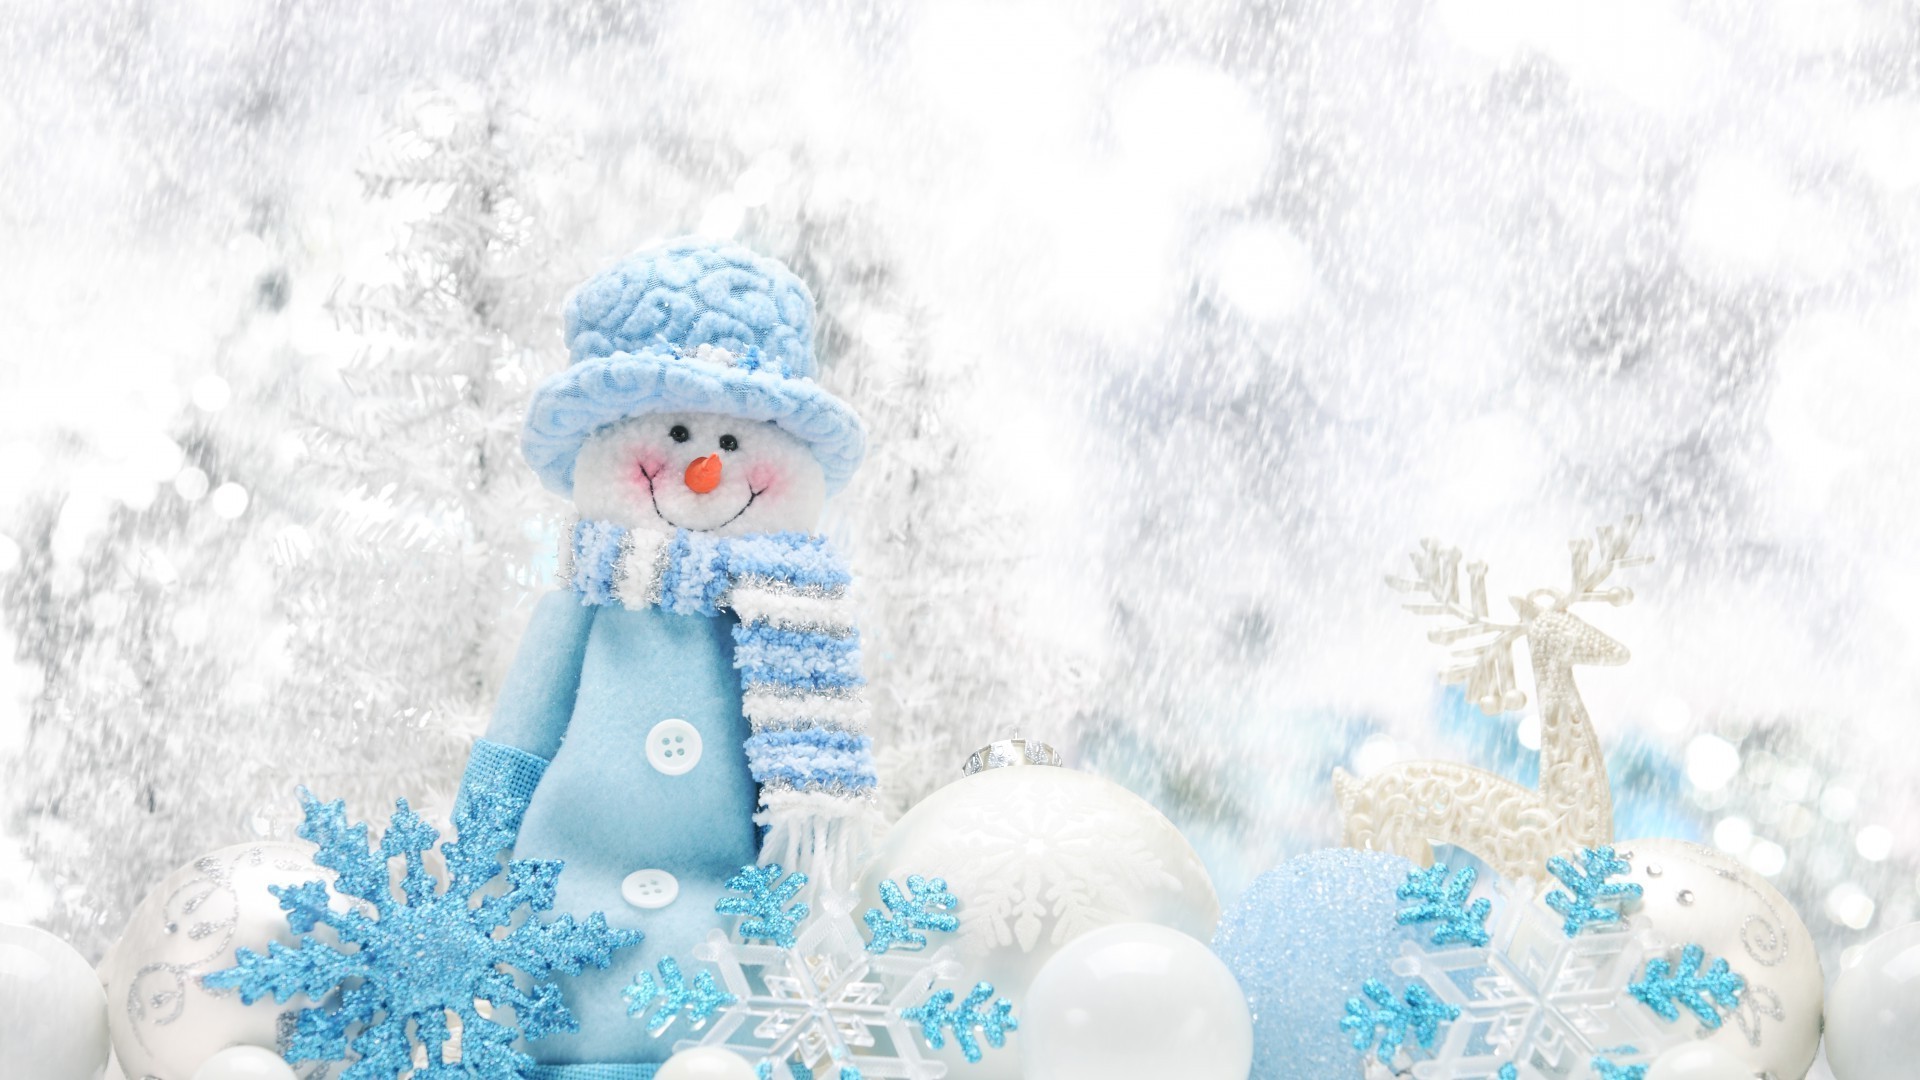 new year winter christmas snow snowflake frost cold merry season snowman celebration ice frozen decoration snow-white eve greeting snowstorm